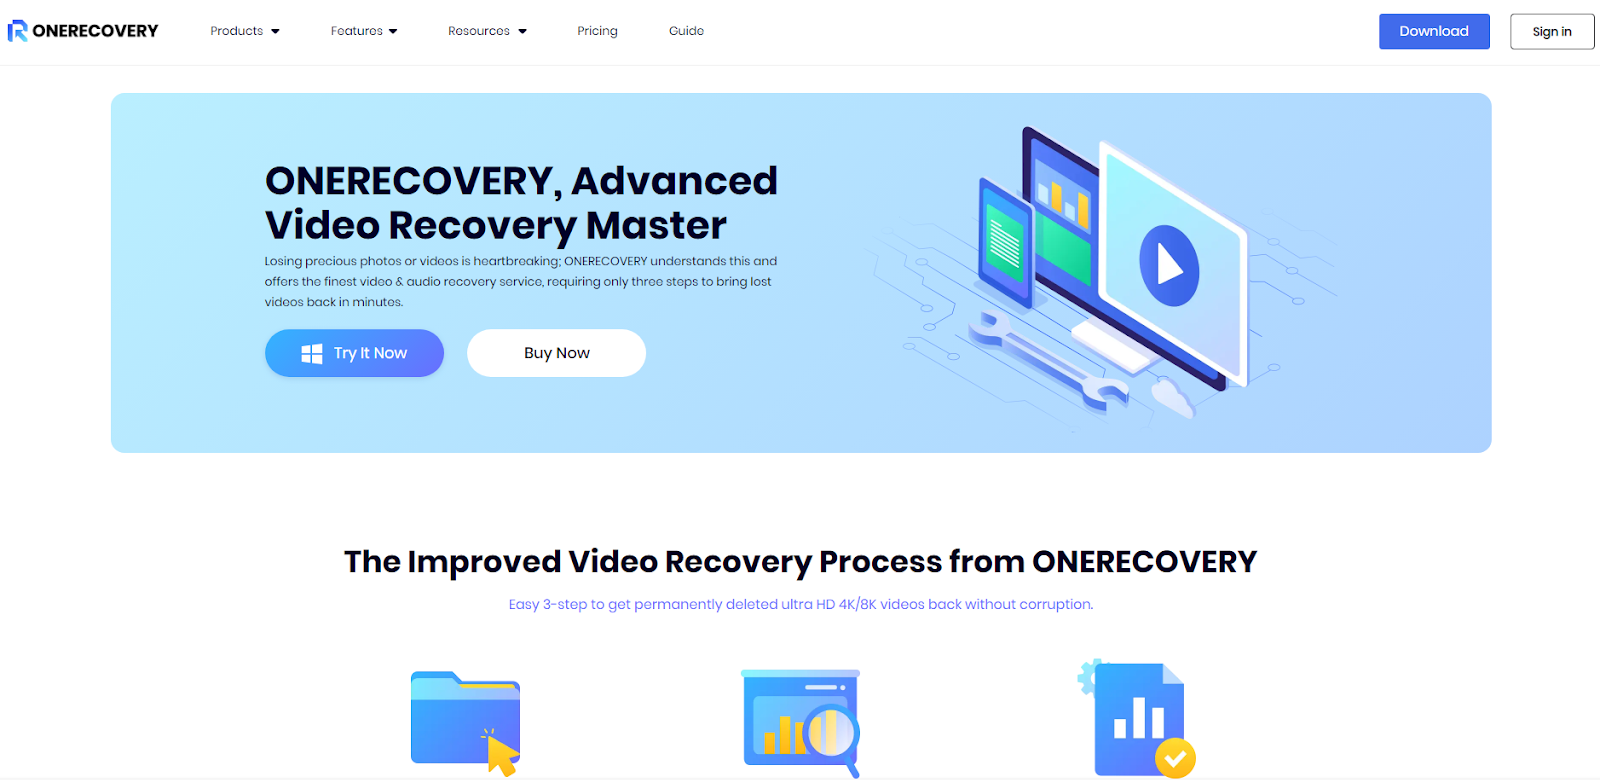 ONERECOVERY video recovery software